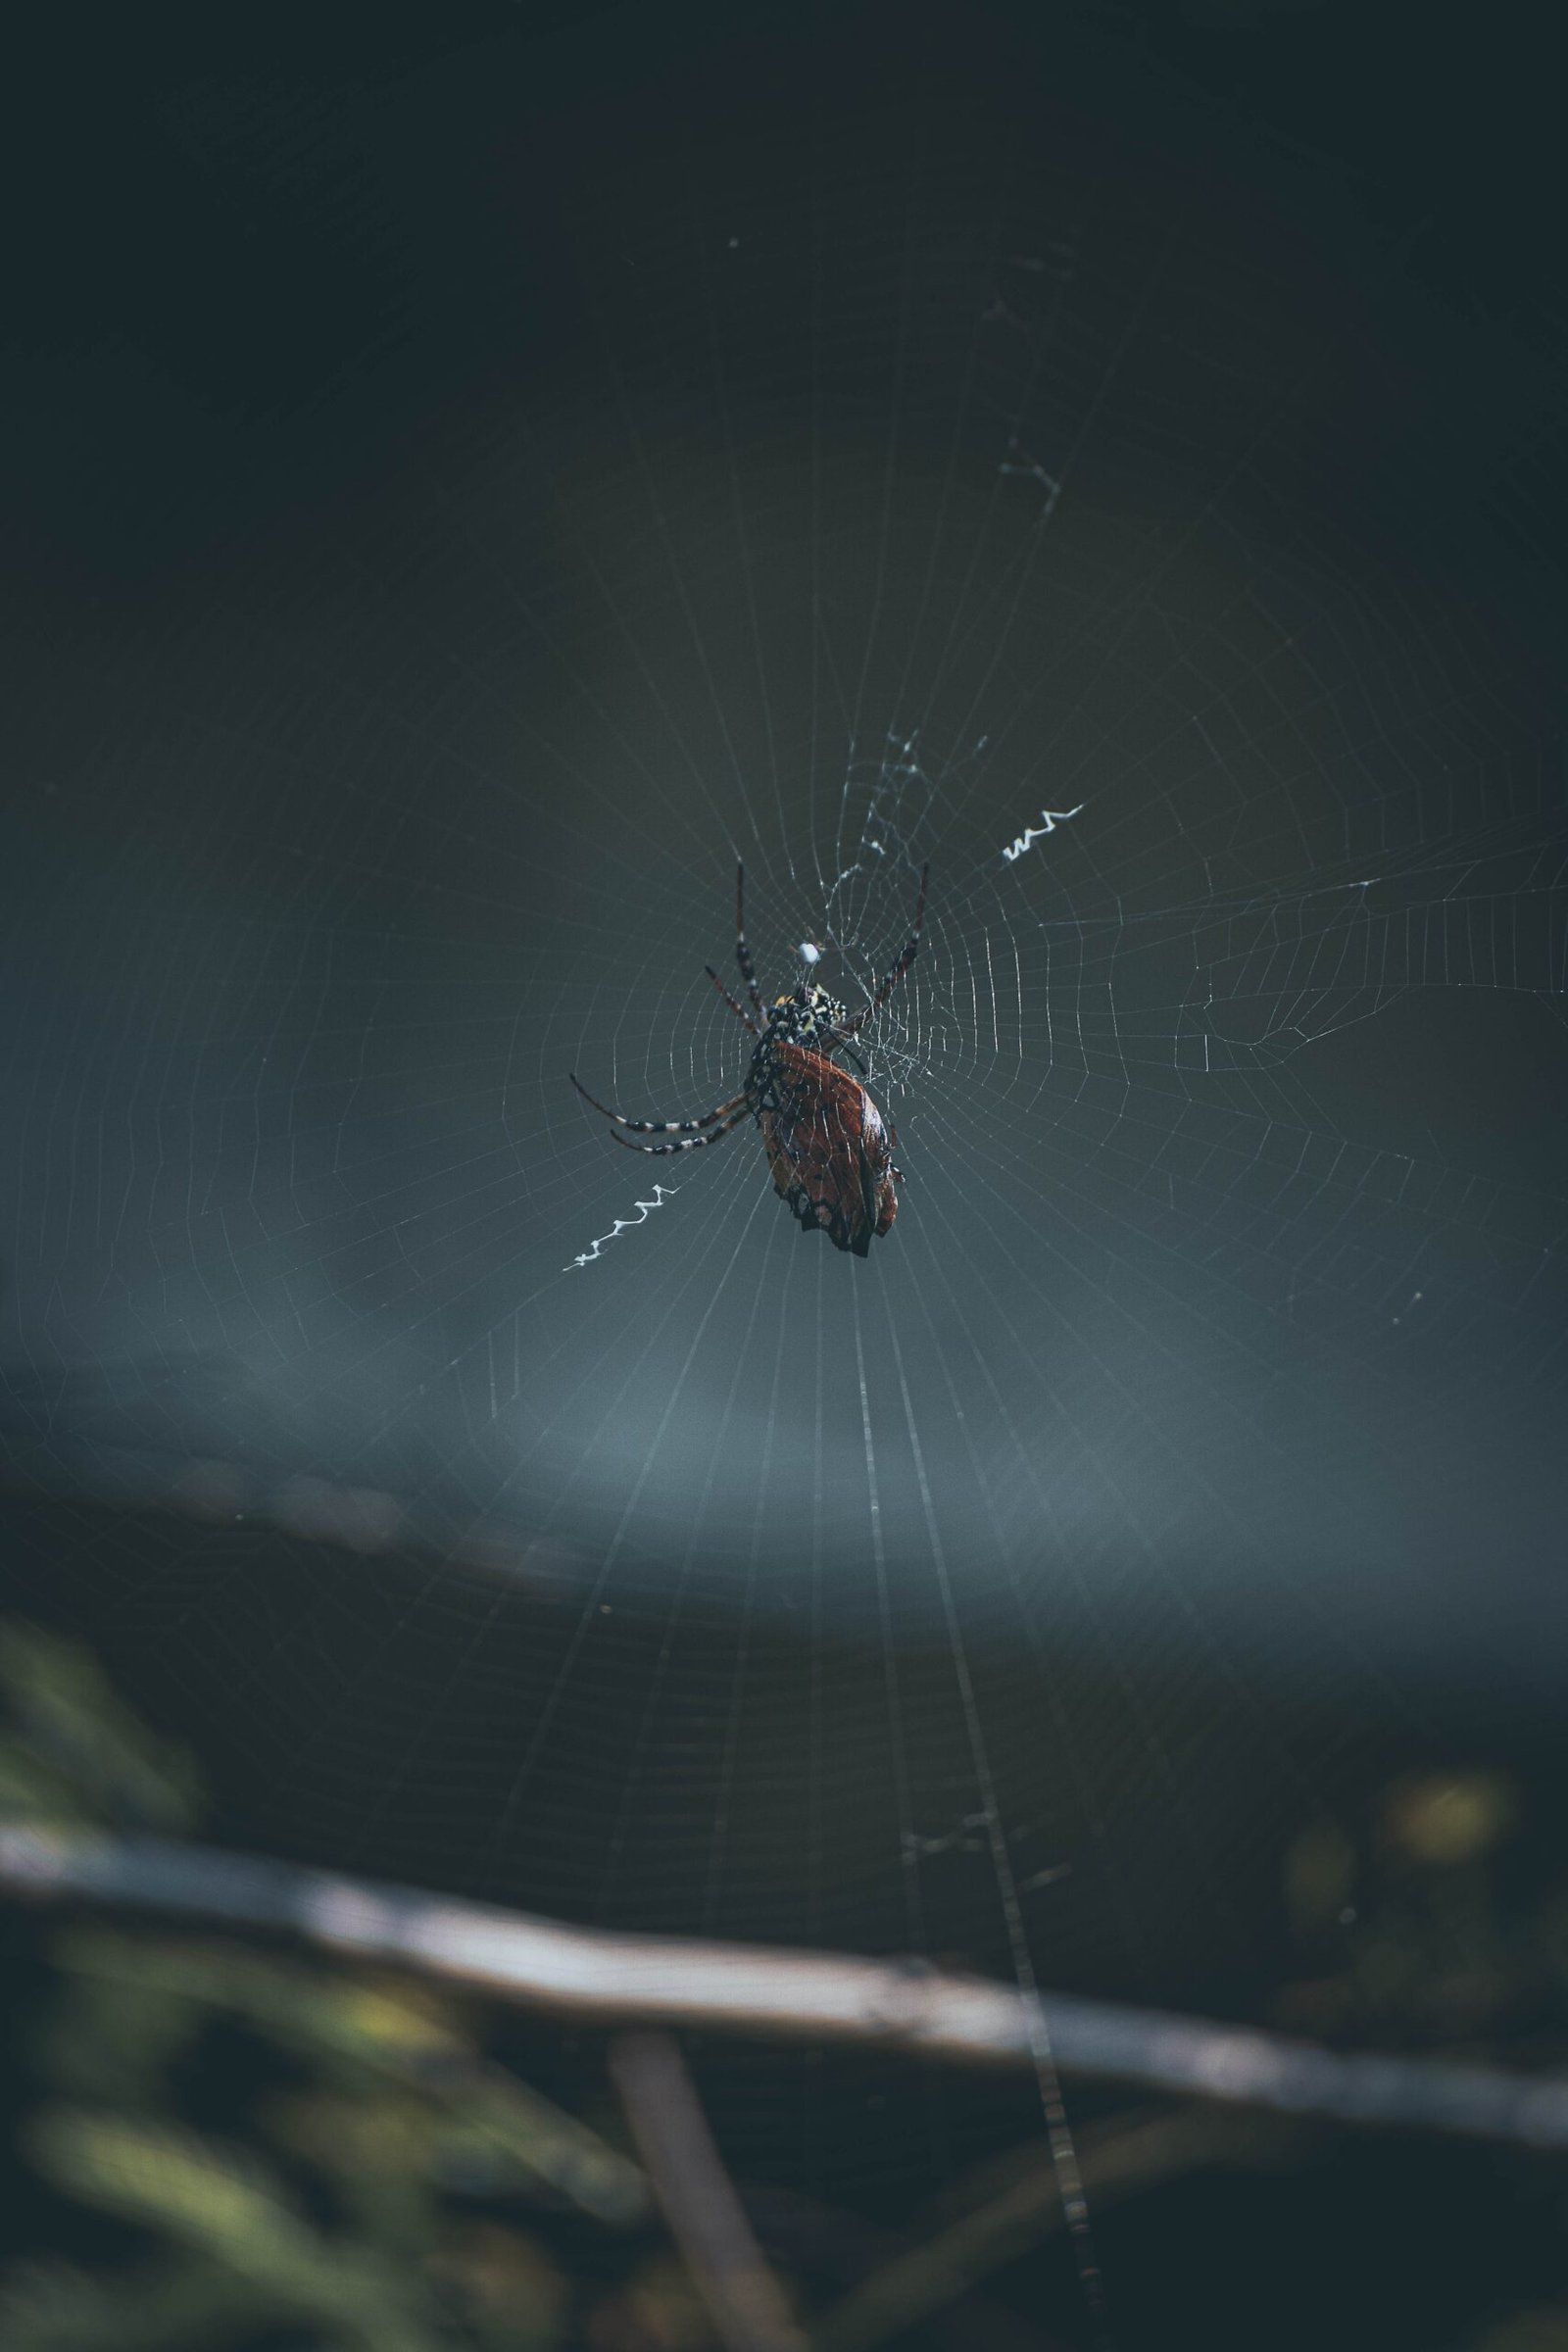 Can You Describe The Unique Hunting Methods Of The Ogre-faced Spider?